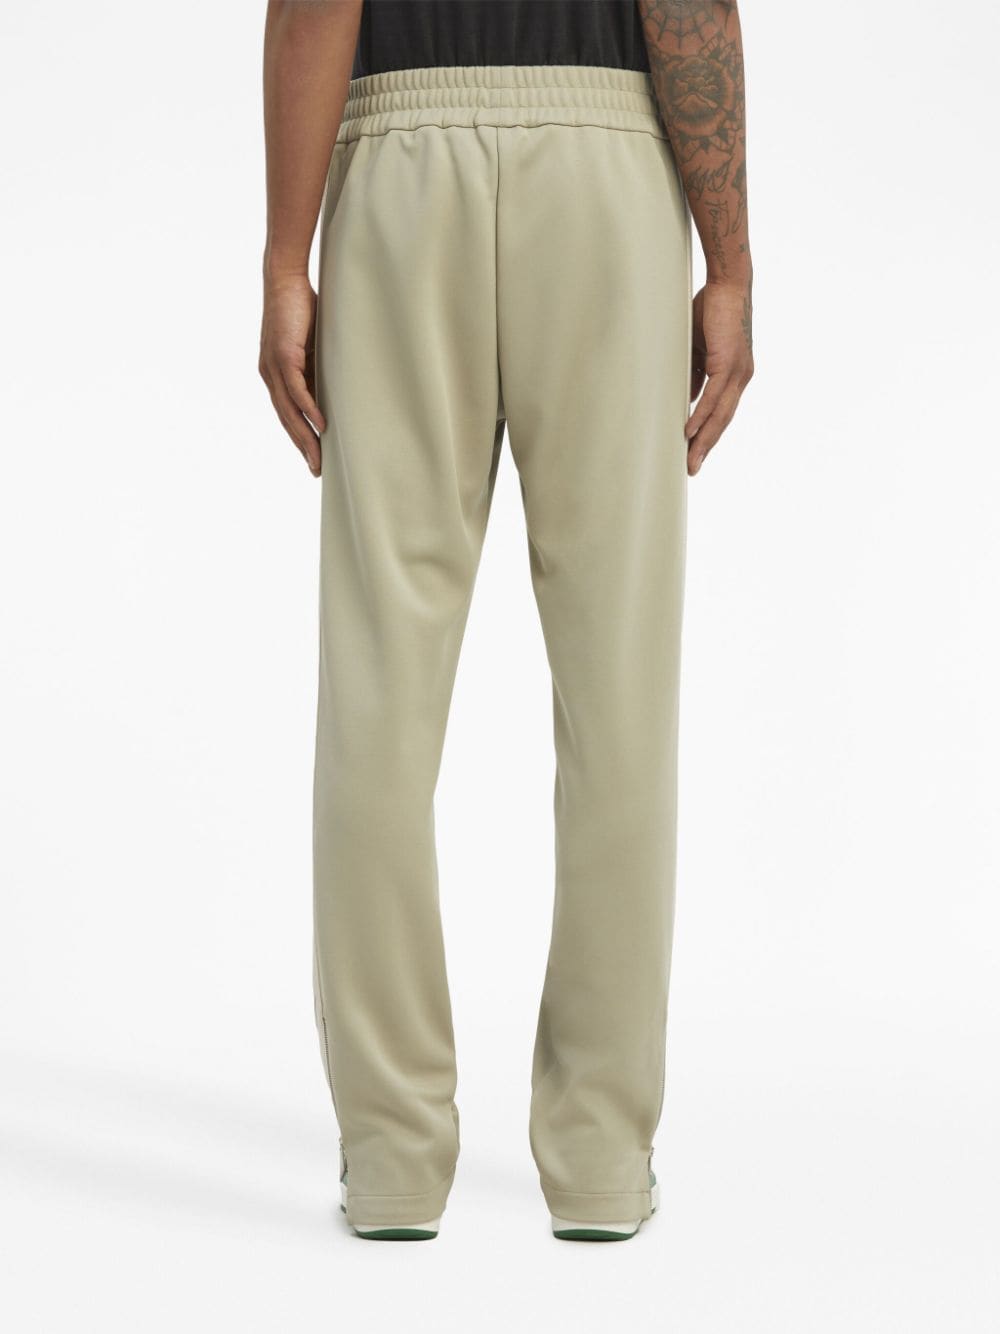 sage green track trousers with monogram logo